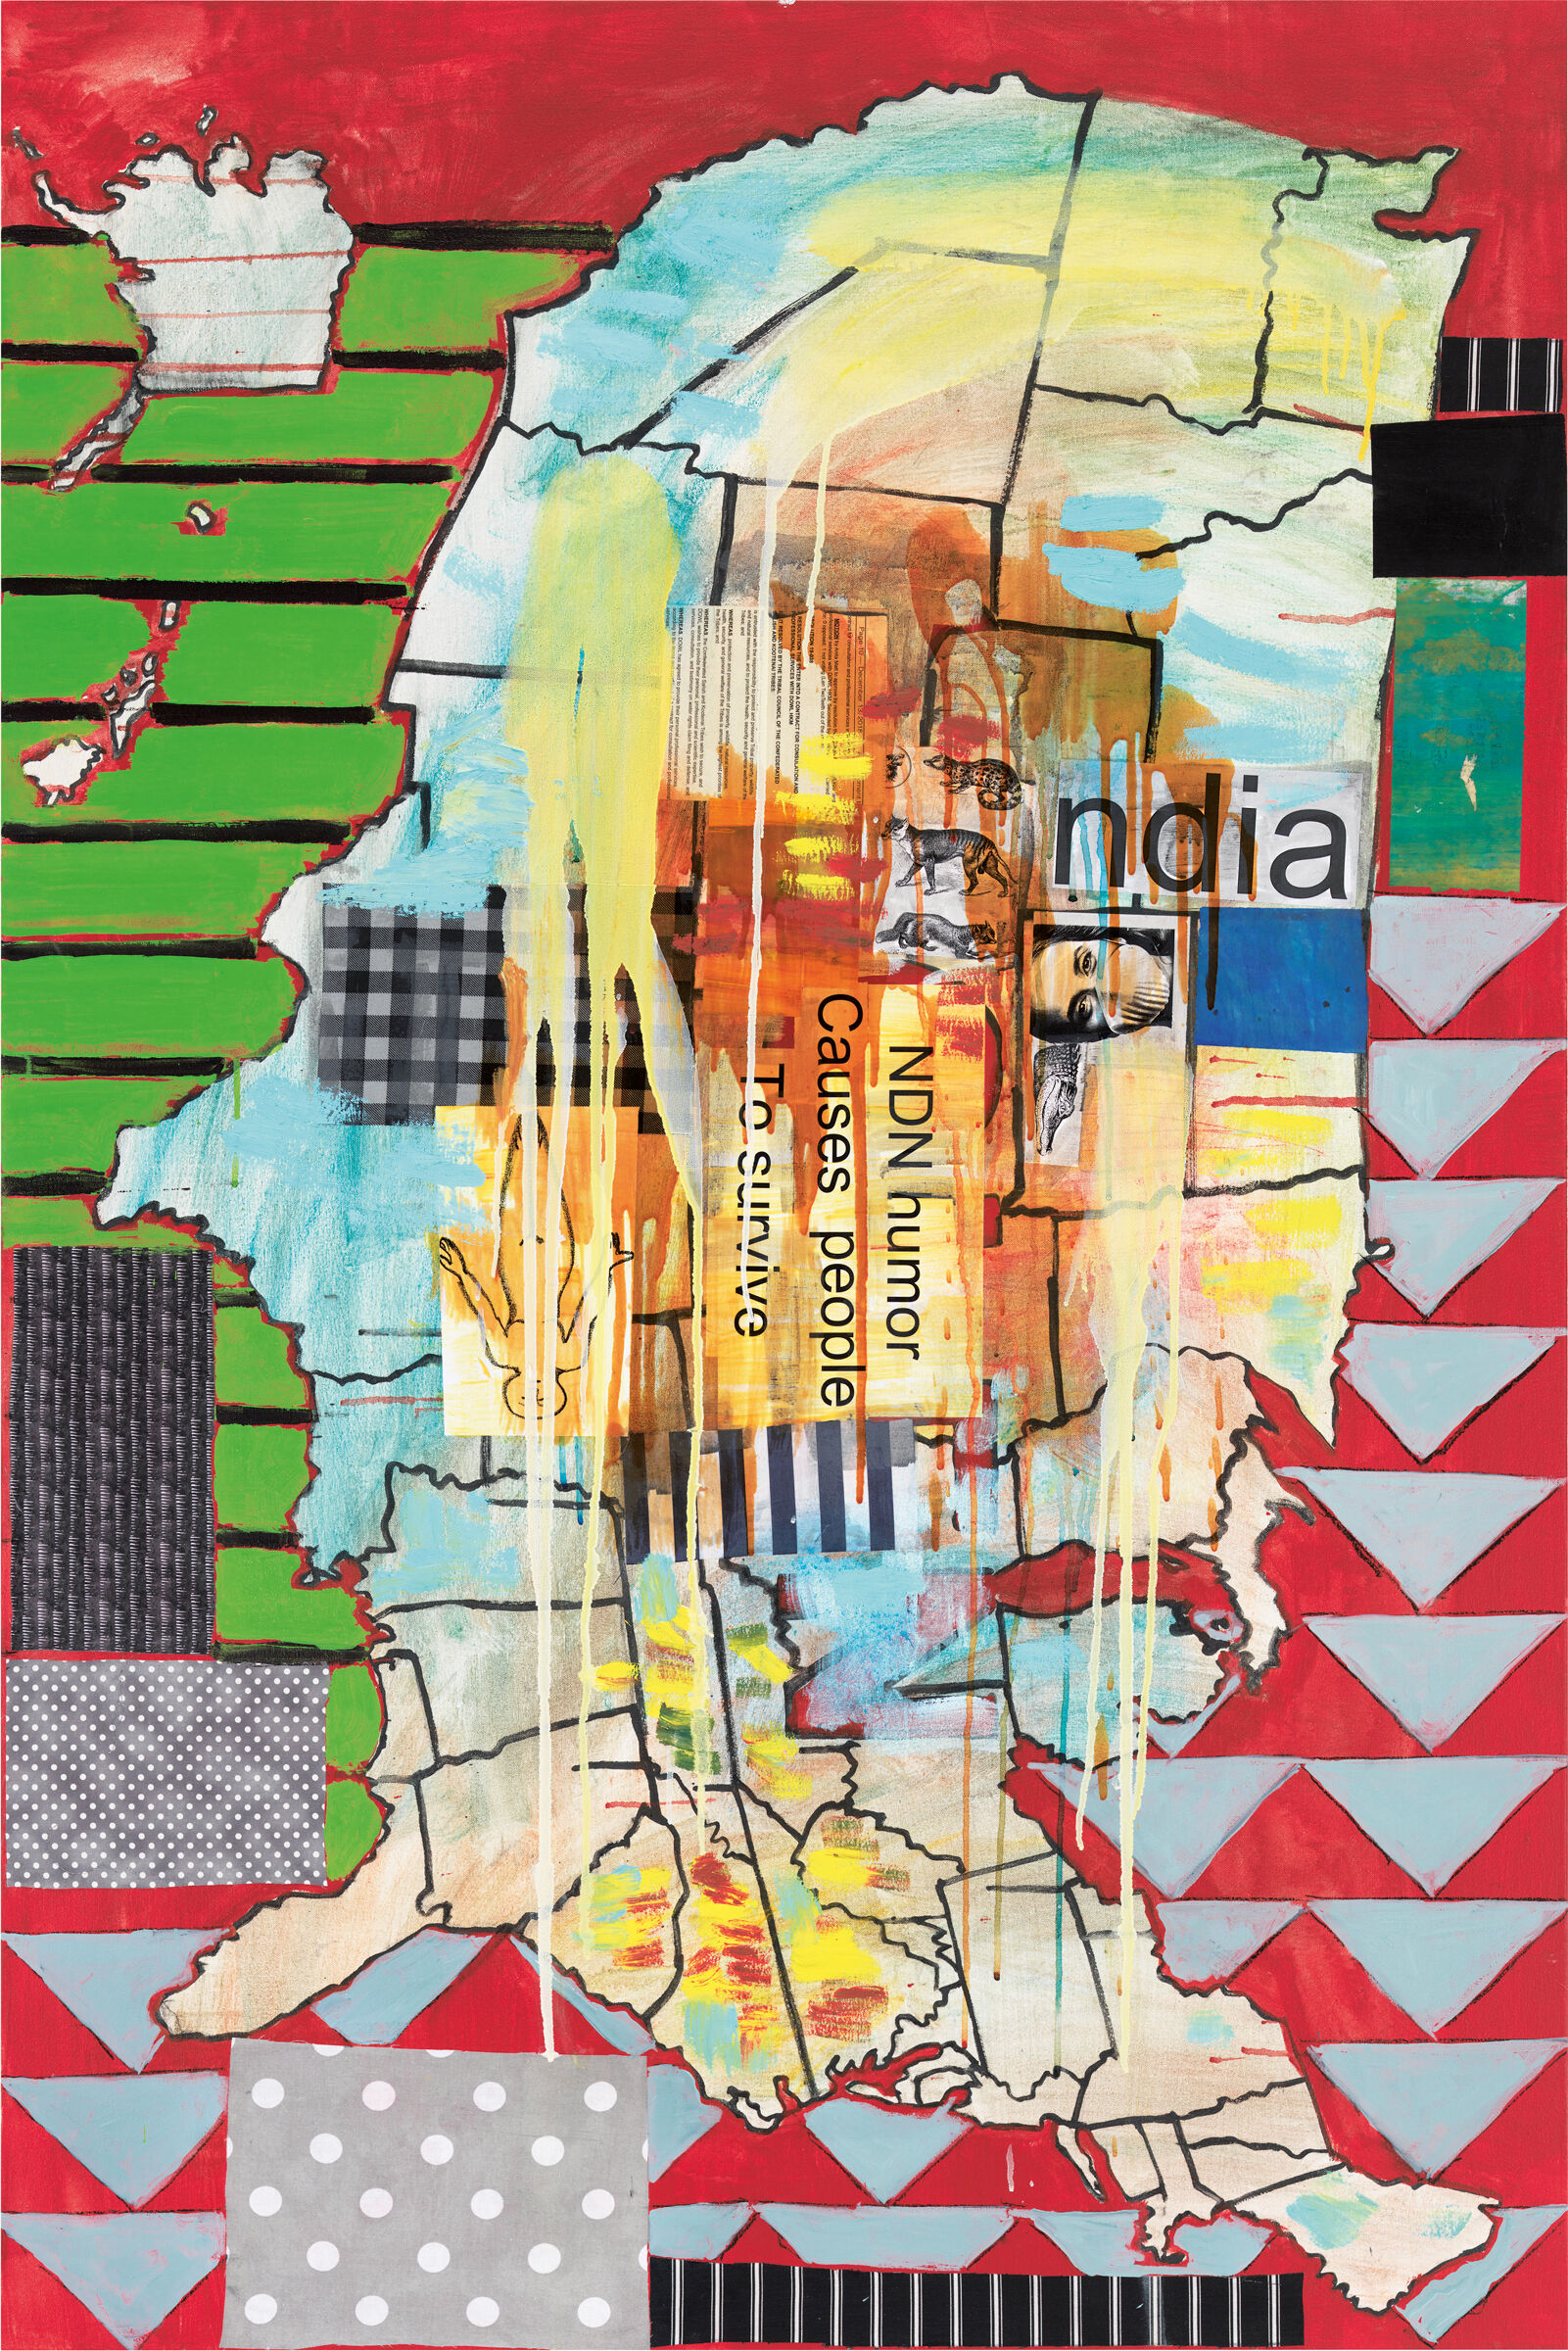 United States map turned on its side surrounded and partially covered by paint splatters, geometric shapes, and collaged photos. Collaged text reads ""NDN humor Causes people To survive"